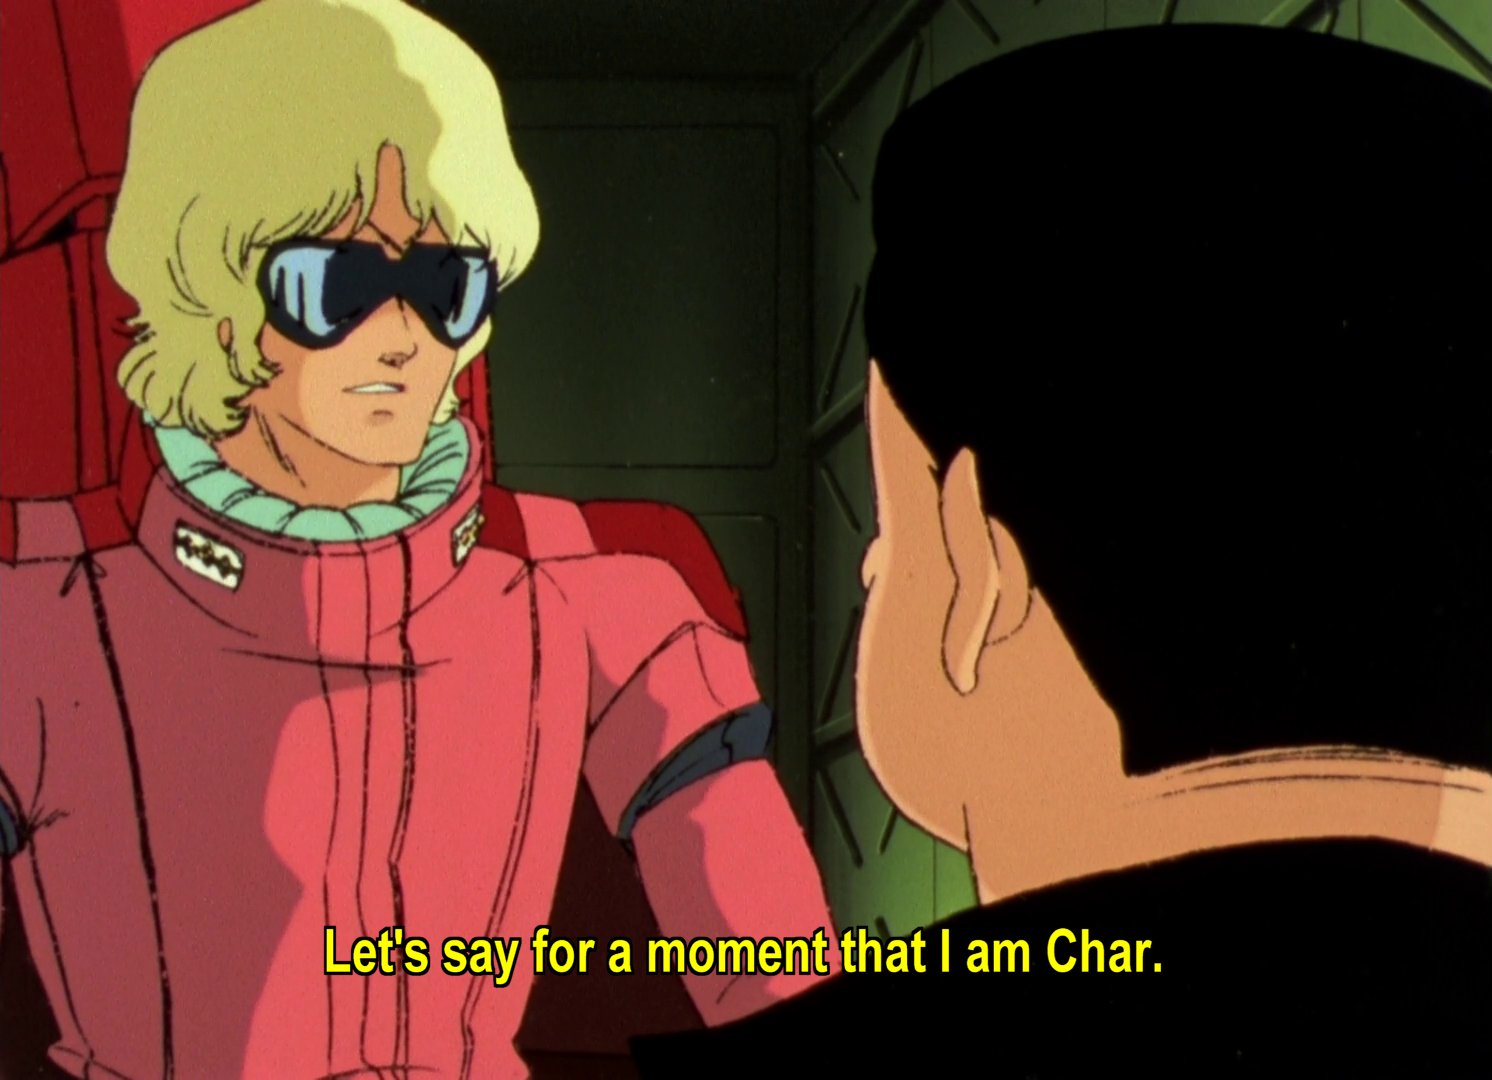 Lt Quattro talking to Kobayashi: Let's say for a moment that I am Char.